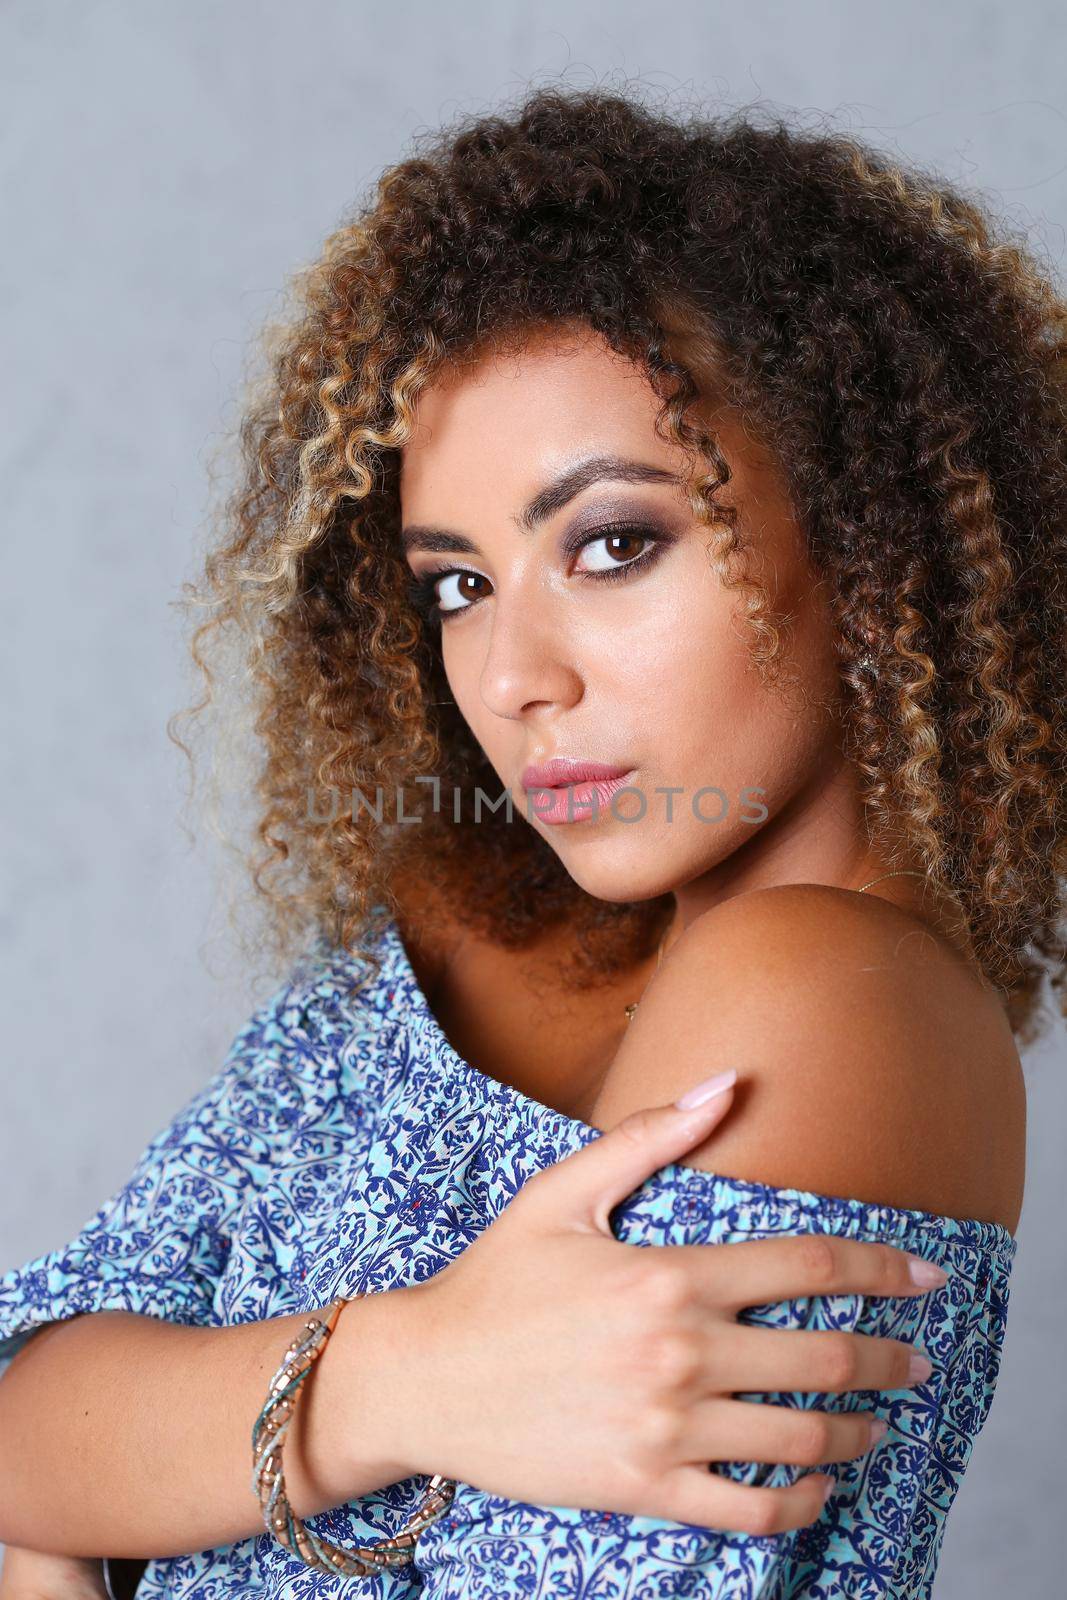 Beautiful black woman portrait. Worth a gray background and smiling beauty fashion style curly hair with white strands view of the eye in the camera